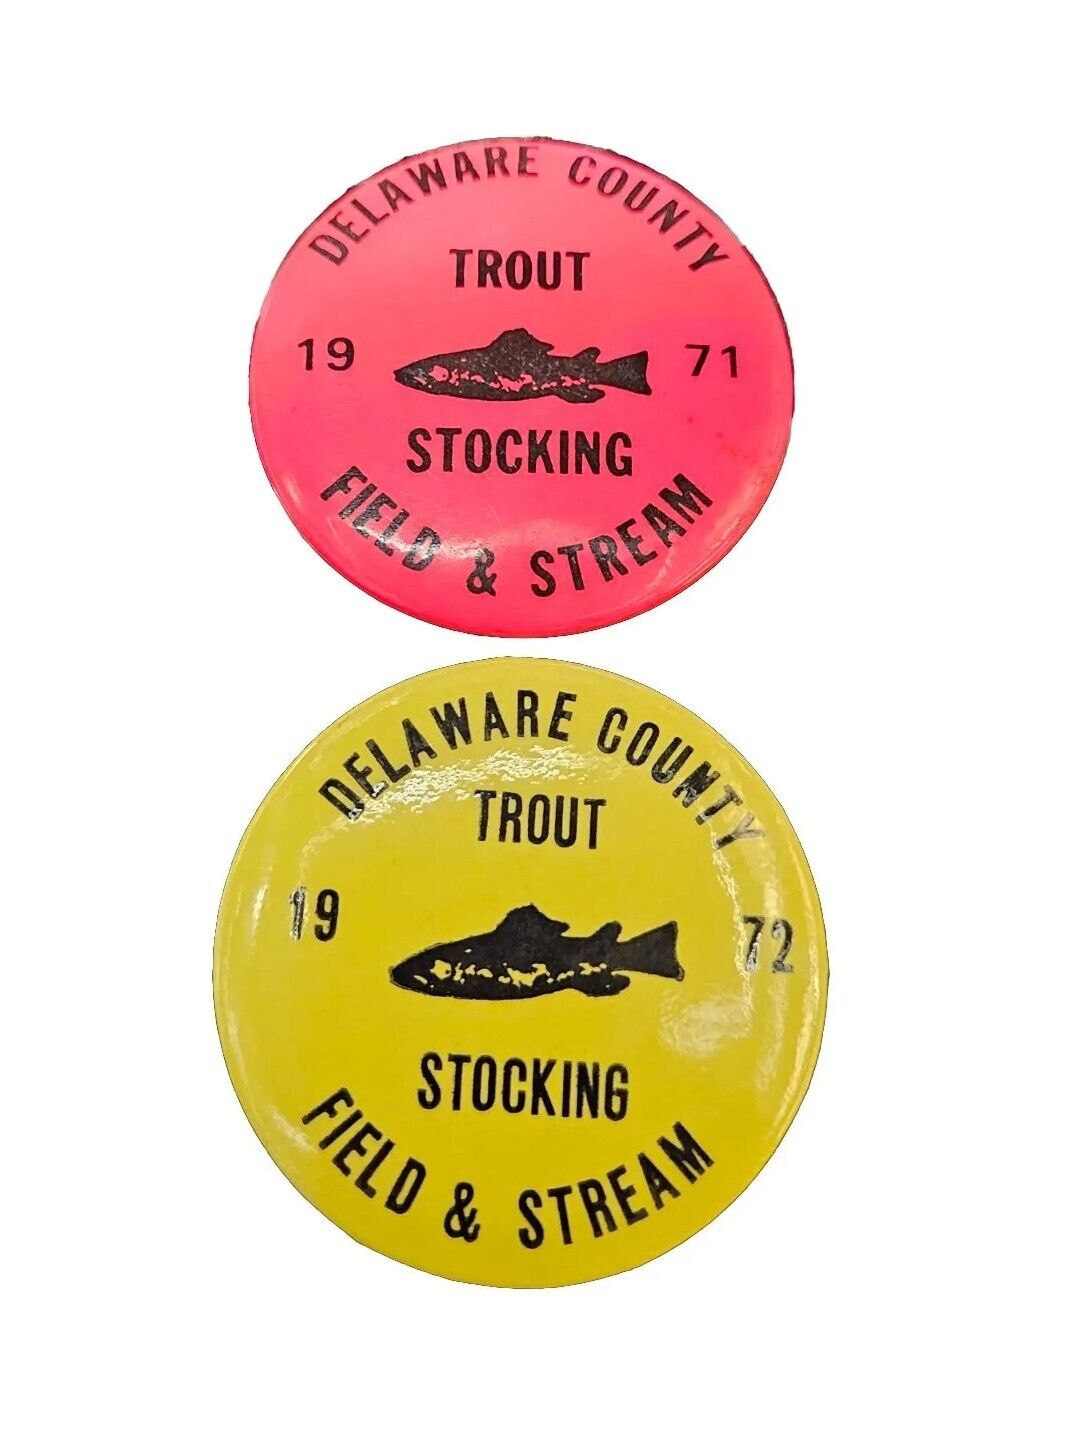 1971- 1972 DELAWARE COUNTY TROUT STOCKING PIN BACK